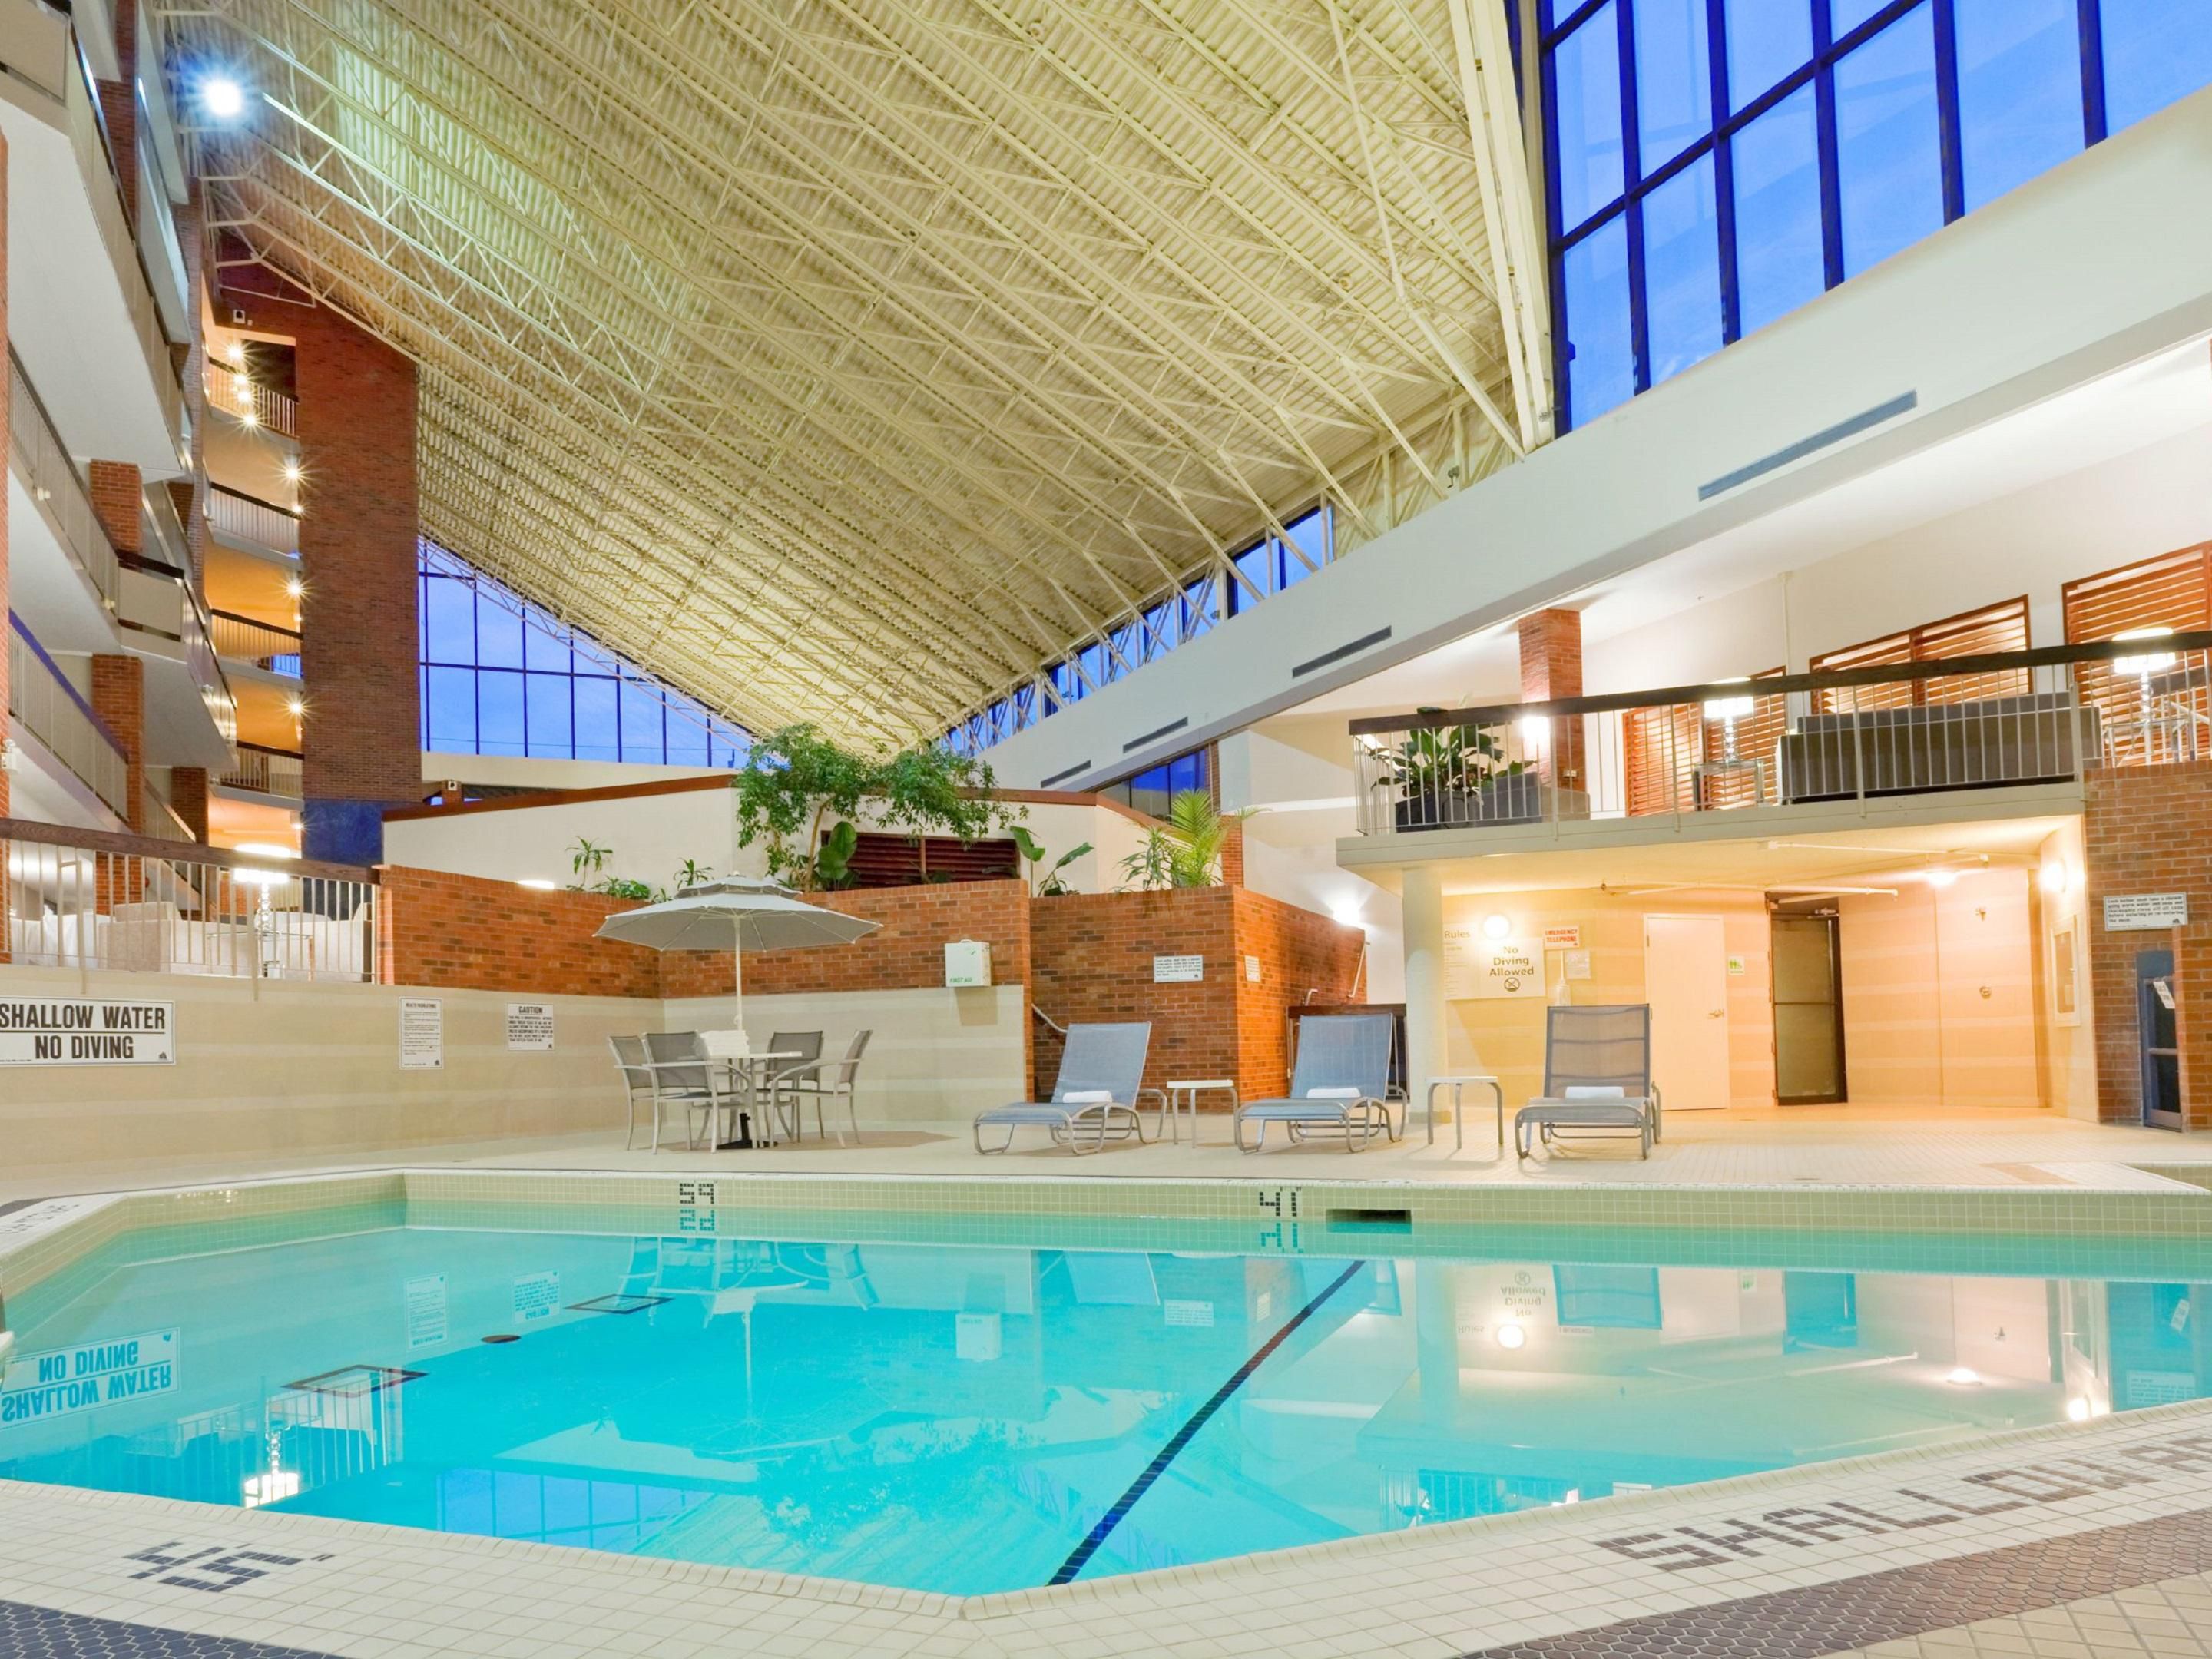 Make a splash in the pool when you stay with us. The pool is open from 9 am to 9 pm.